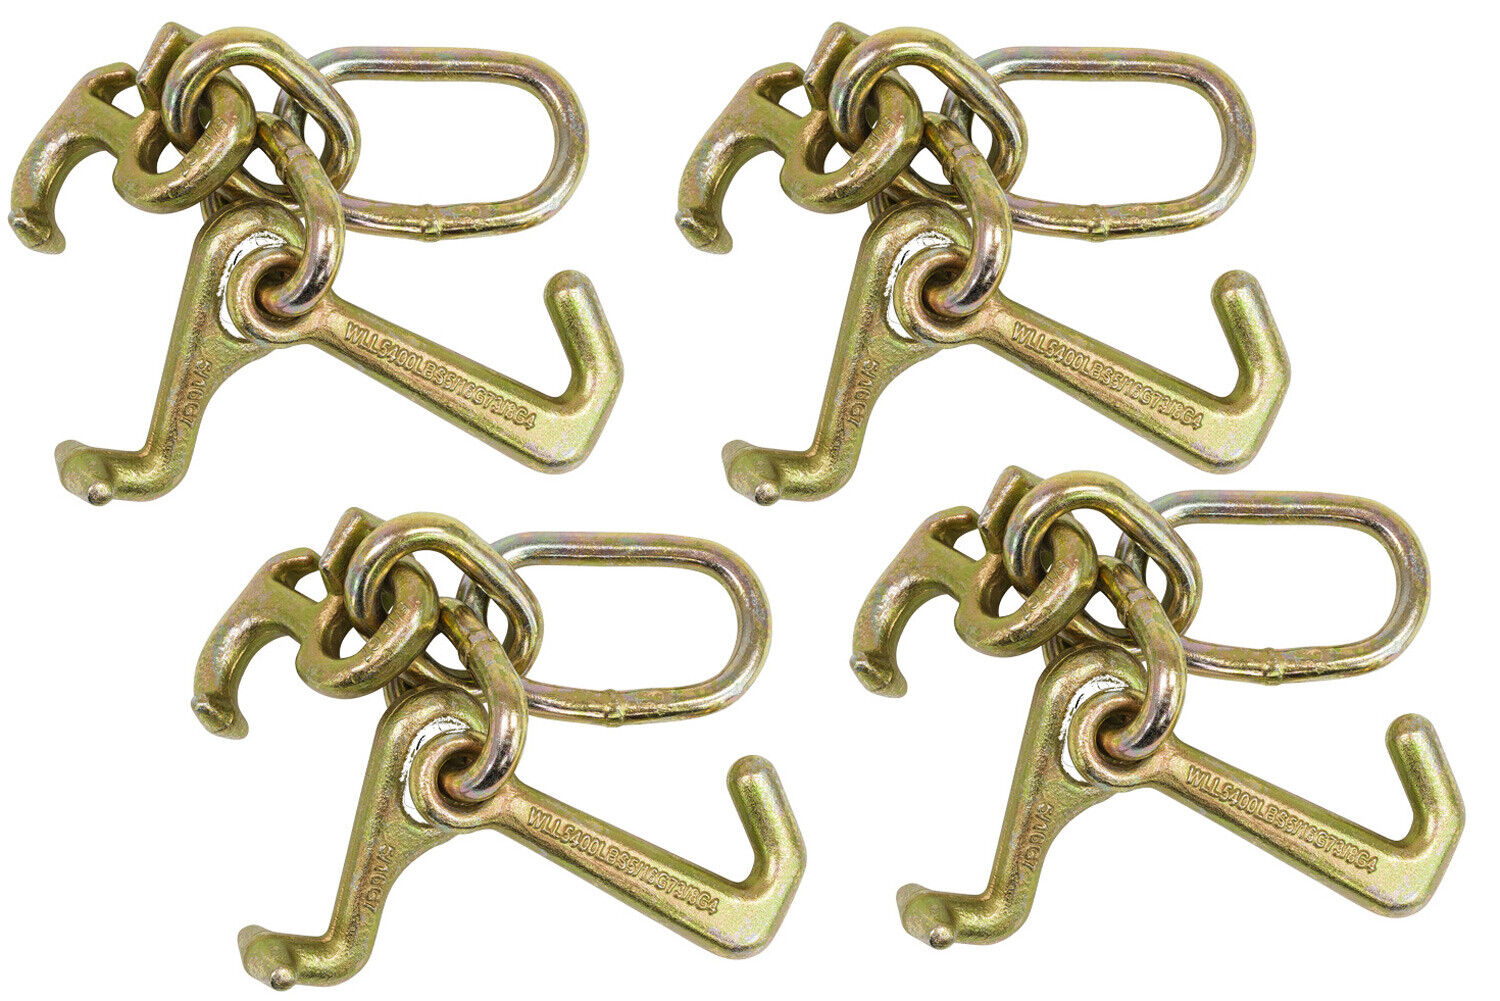 (4 Pack) RTJ Cluster Hook Heavy Duty Wrecker Hauler Tow Towing Truck Chain Pair